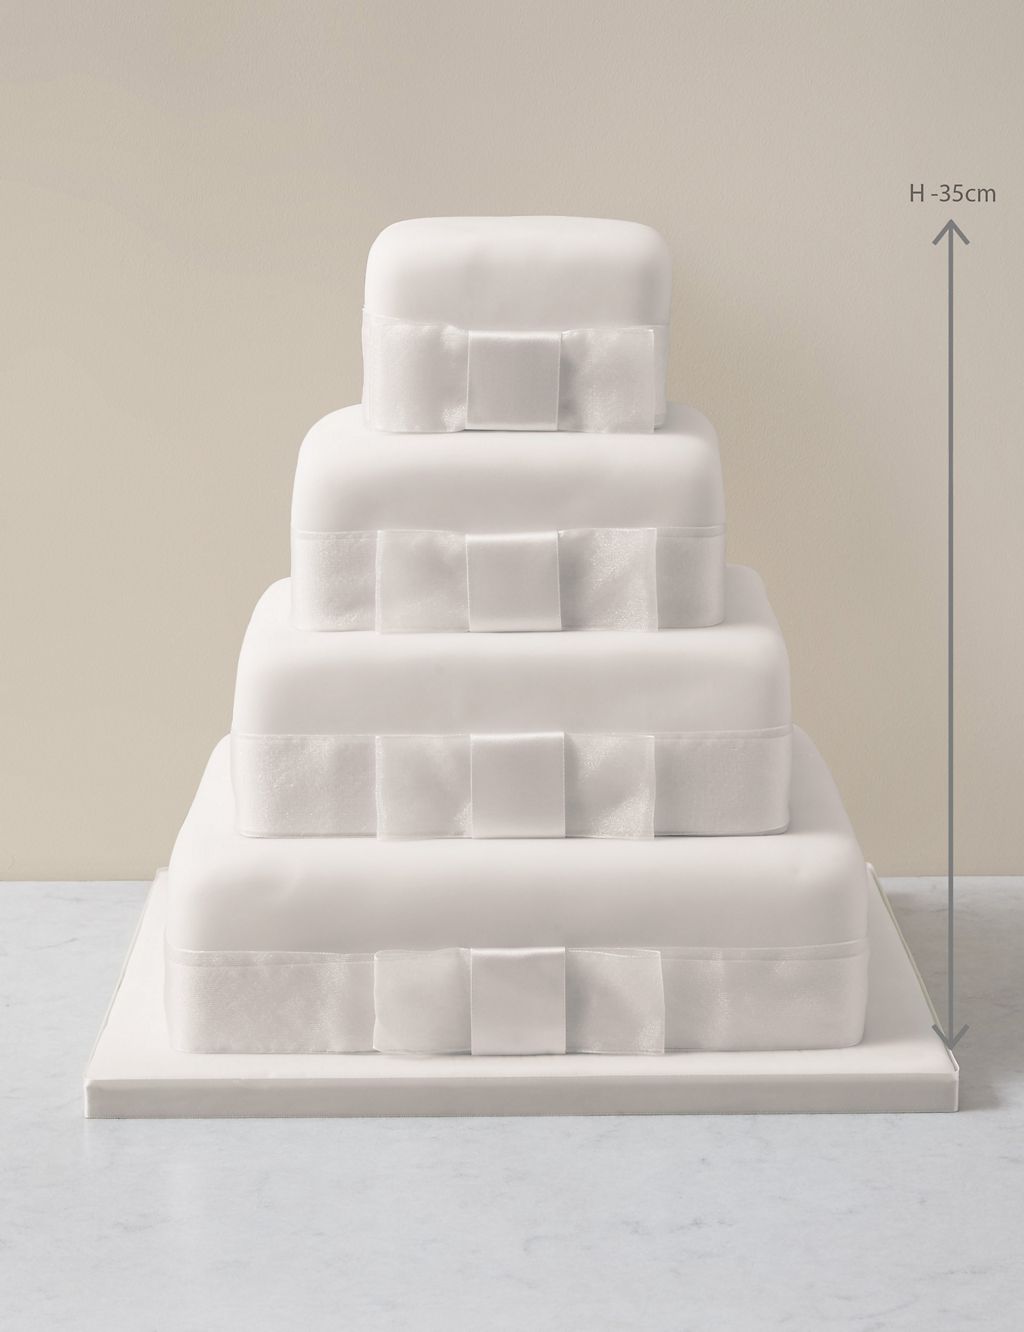 4 Tier Elegant Wedding Cake – Assorted Flavours with Lemon (Serves 200) Last order date 26th March 2 of 4